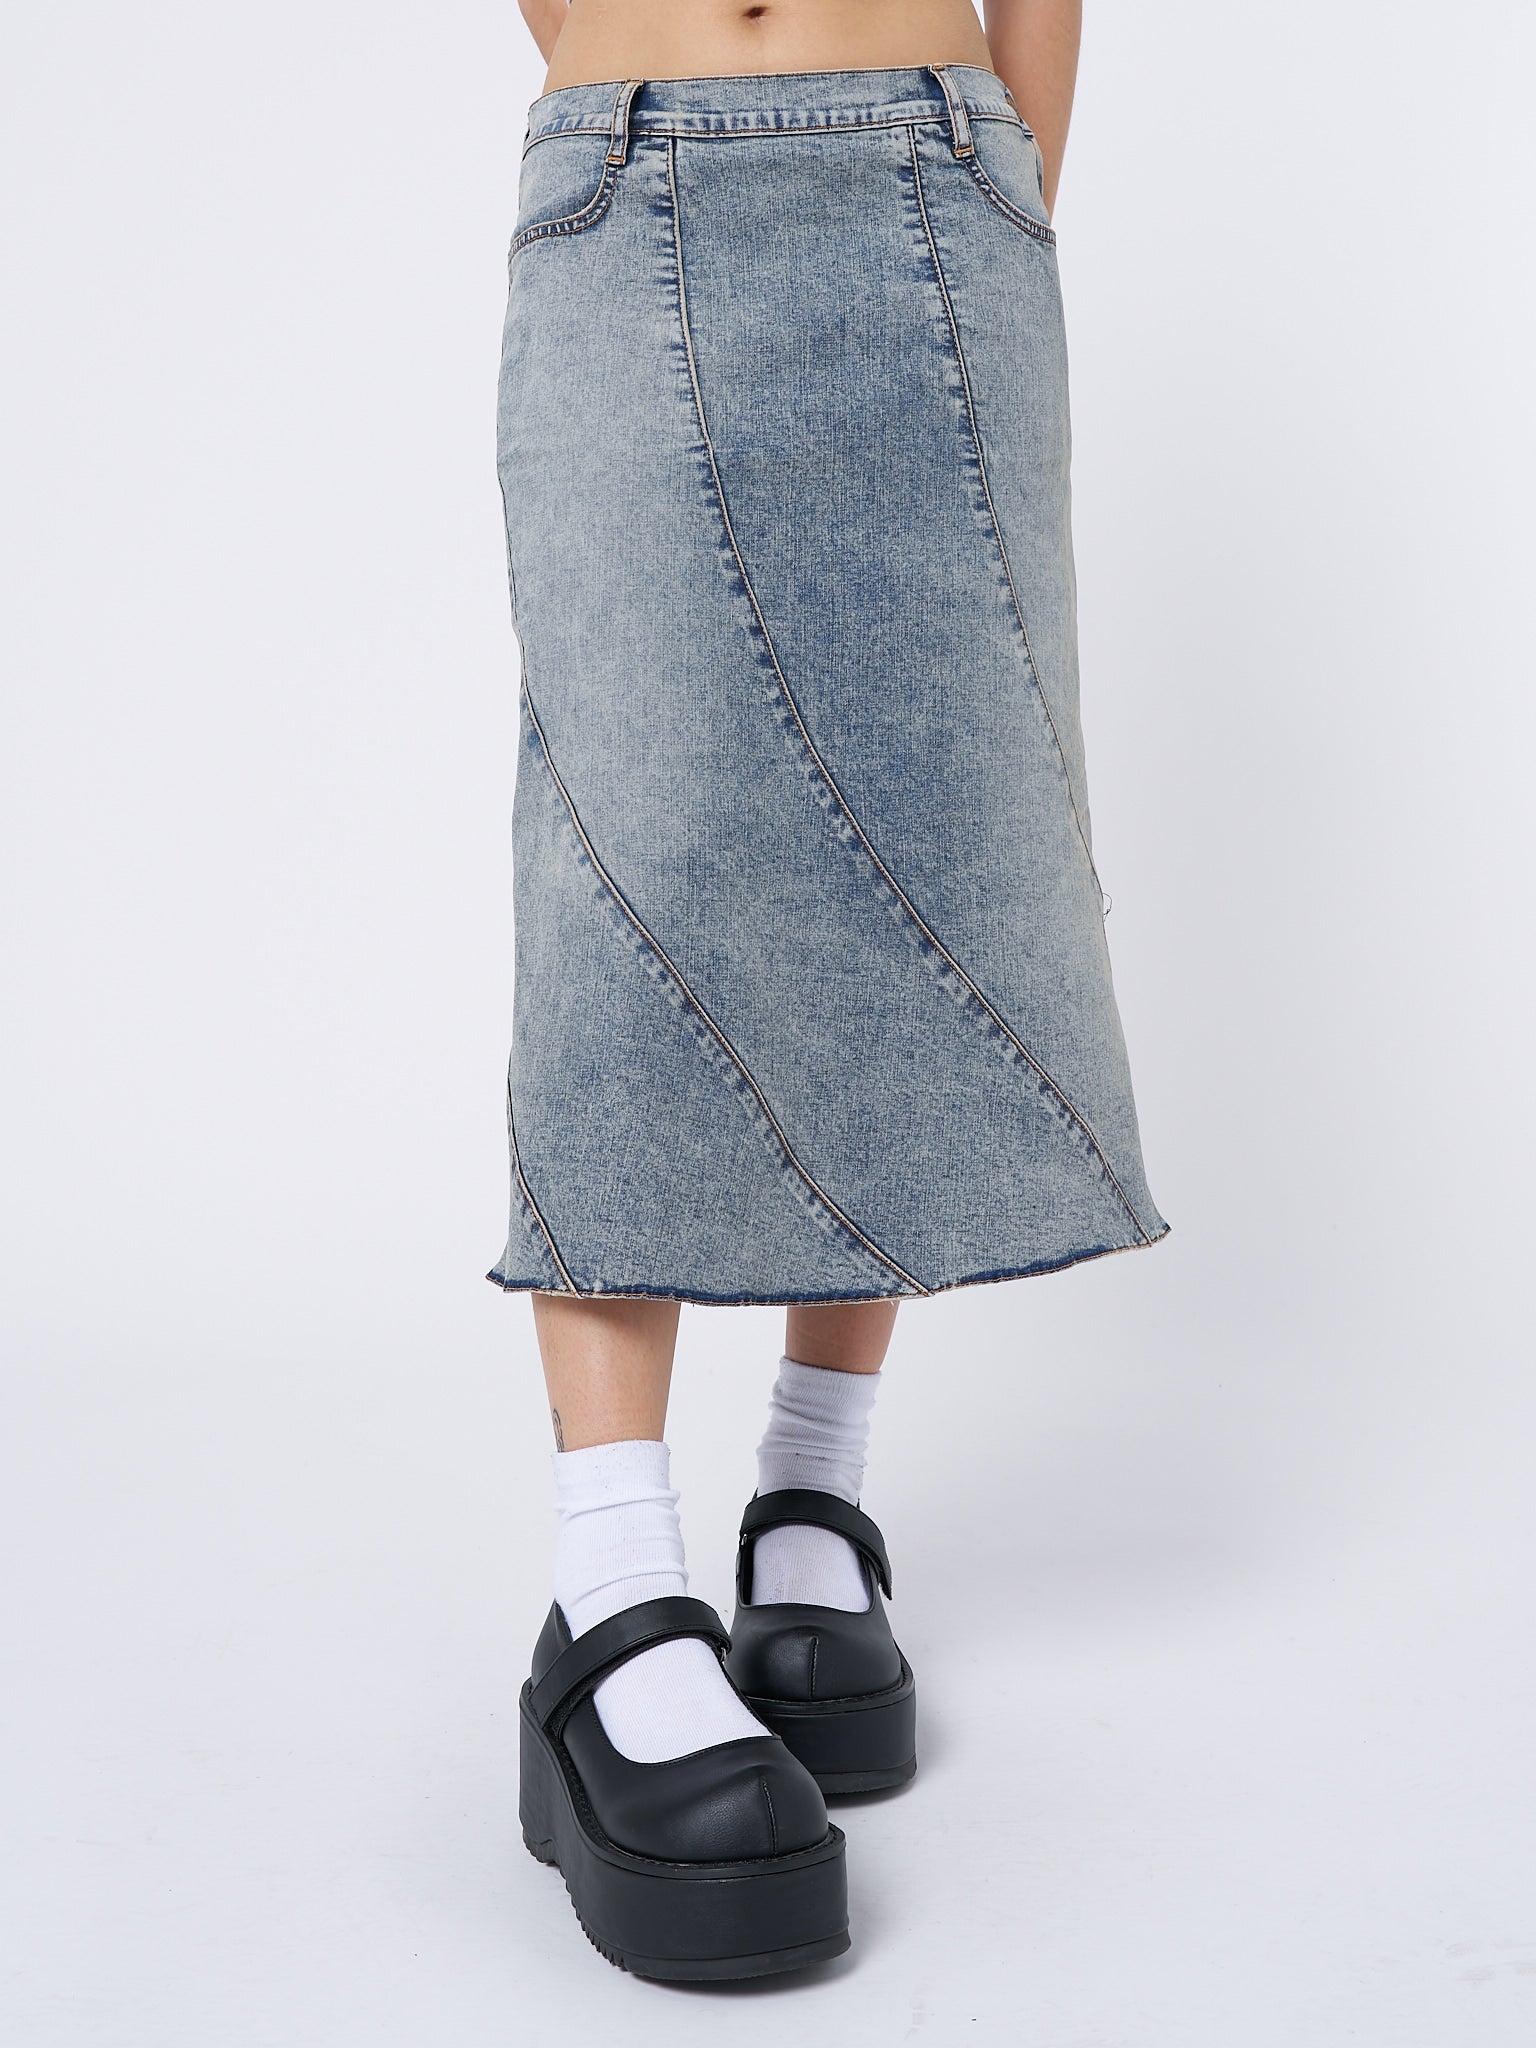 Lizzie Flared Denim Maxi Skirt - Stylish and versatile denim skirt for women. Flattering flared silhouette with a trendy maxi length. 